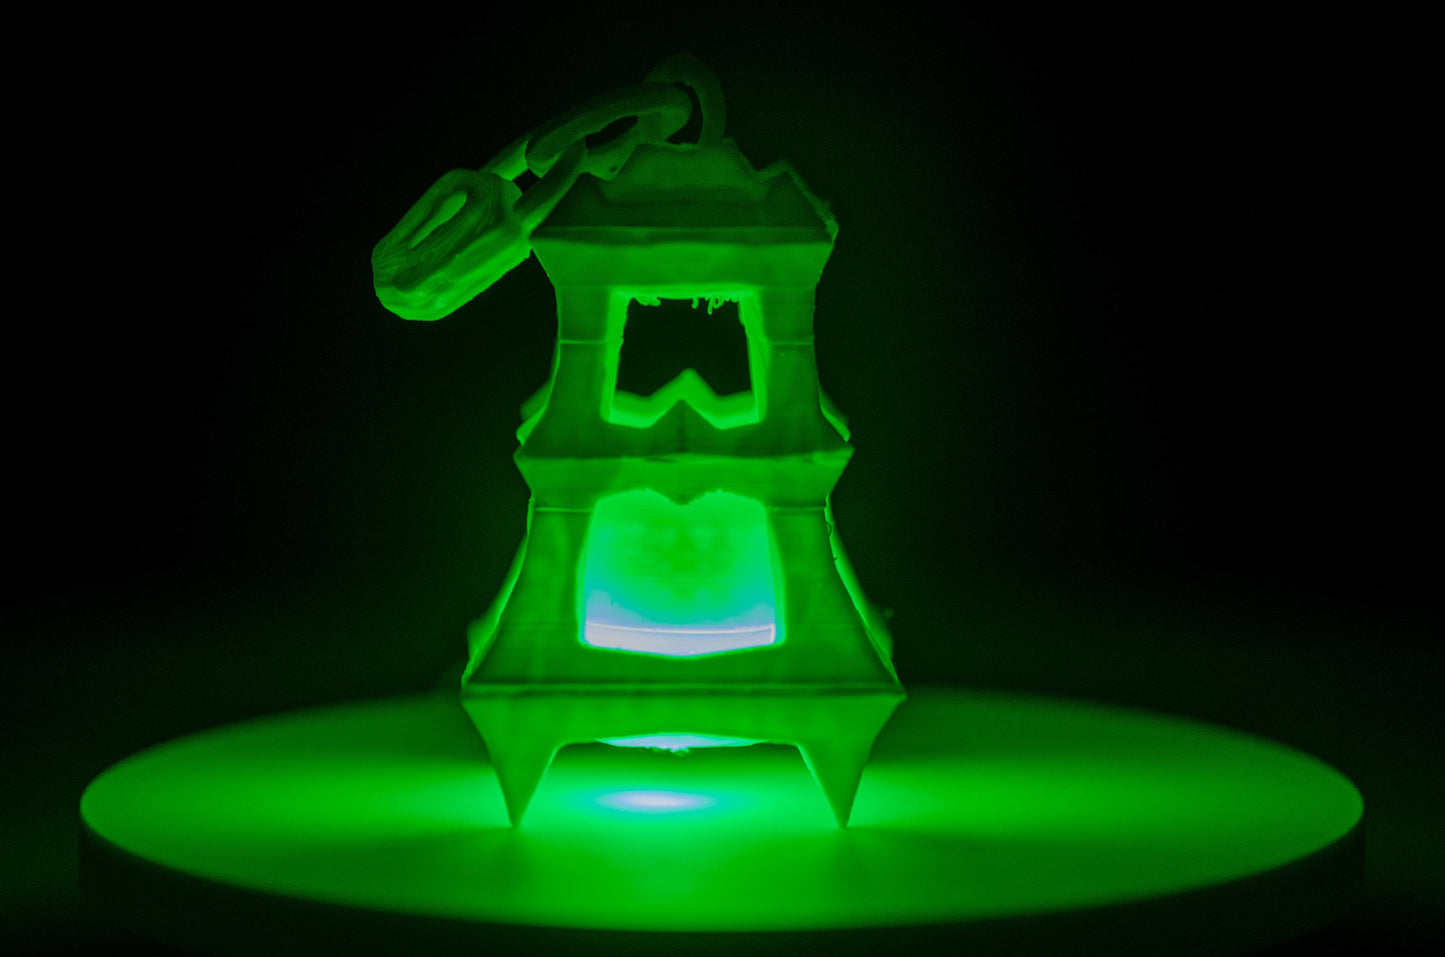 Thresh LED Light Up Cosplay Lantern From League of Legends